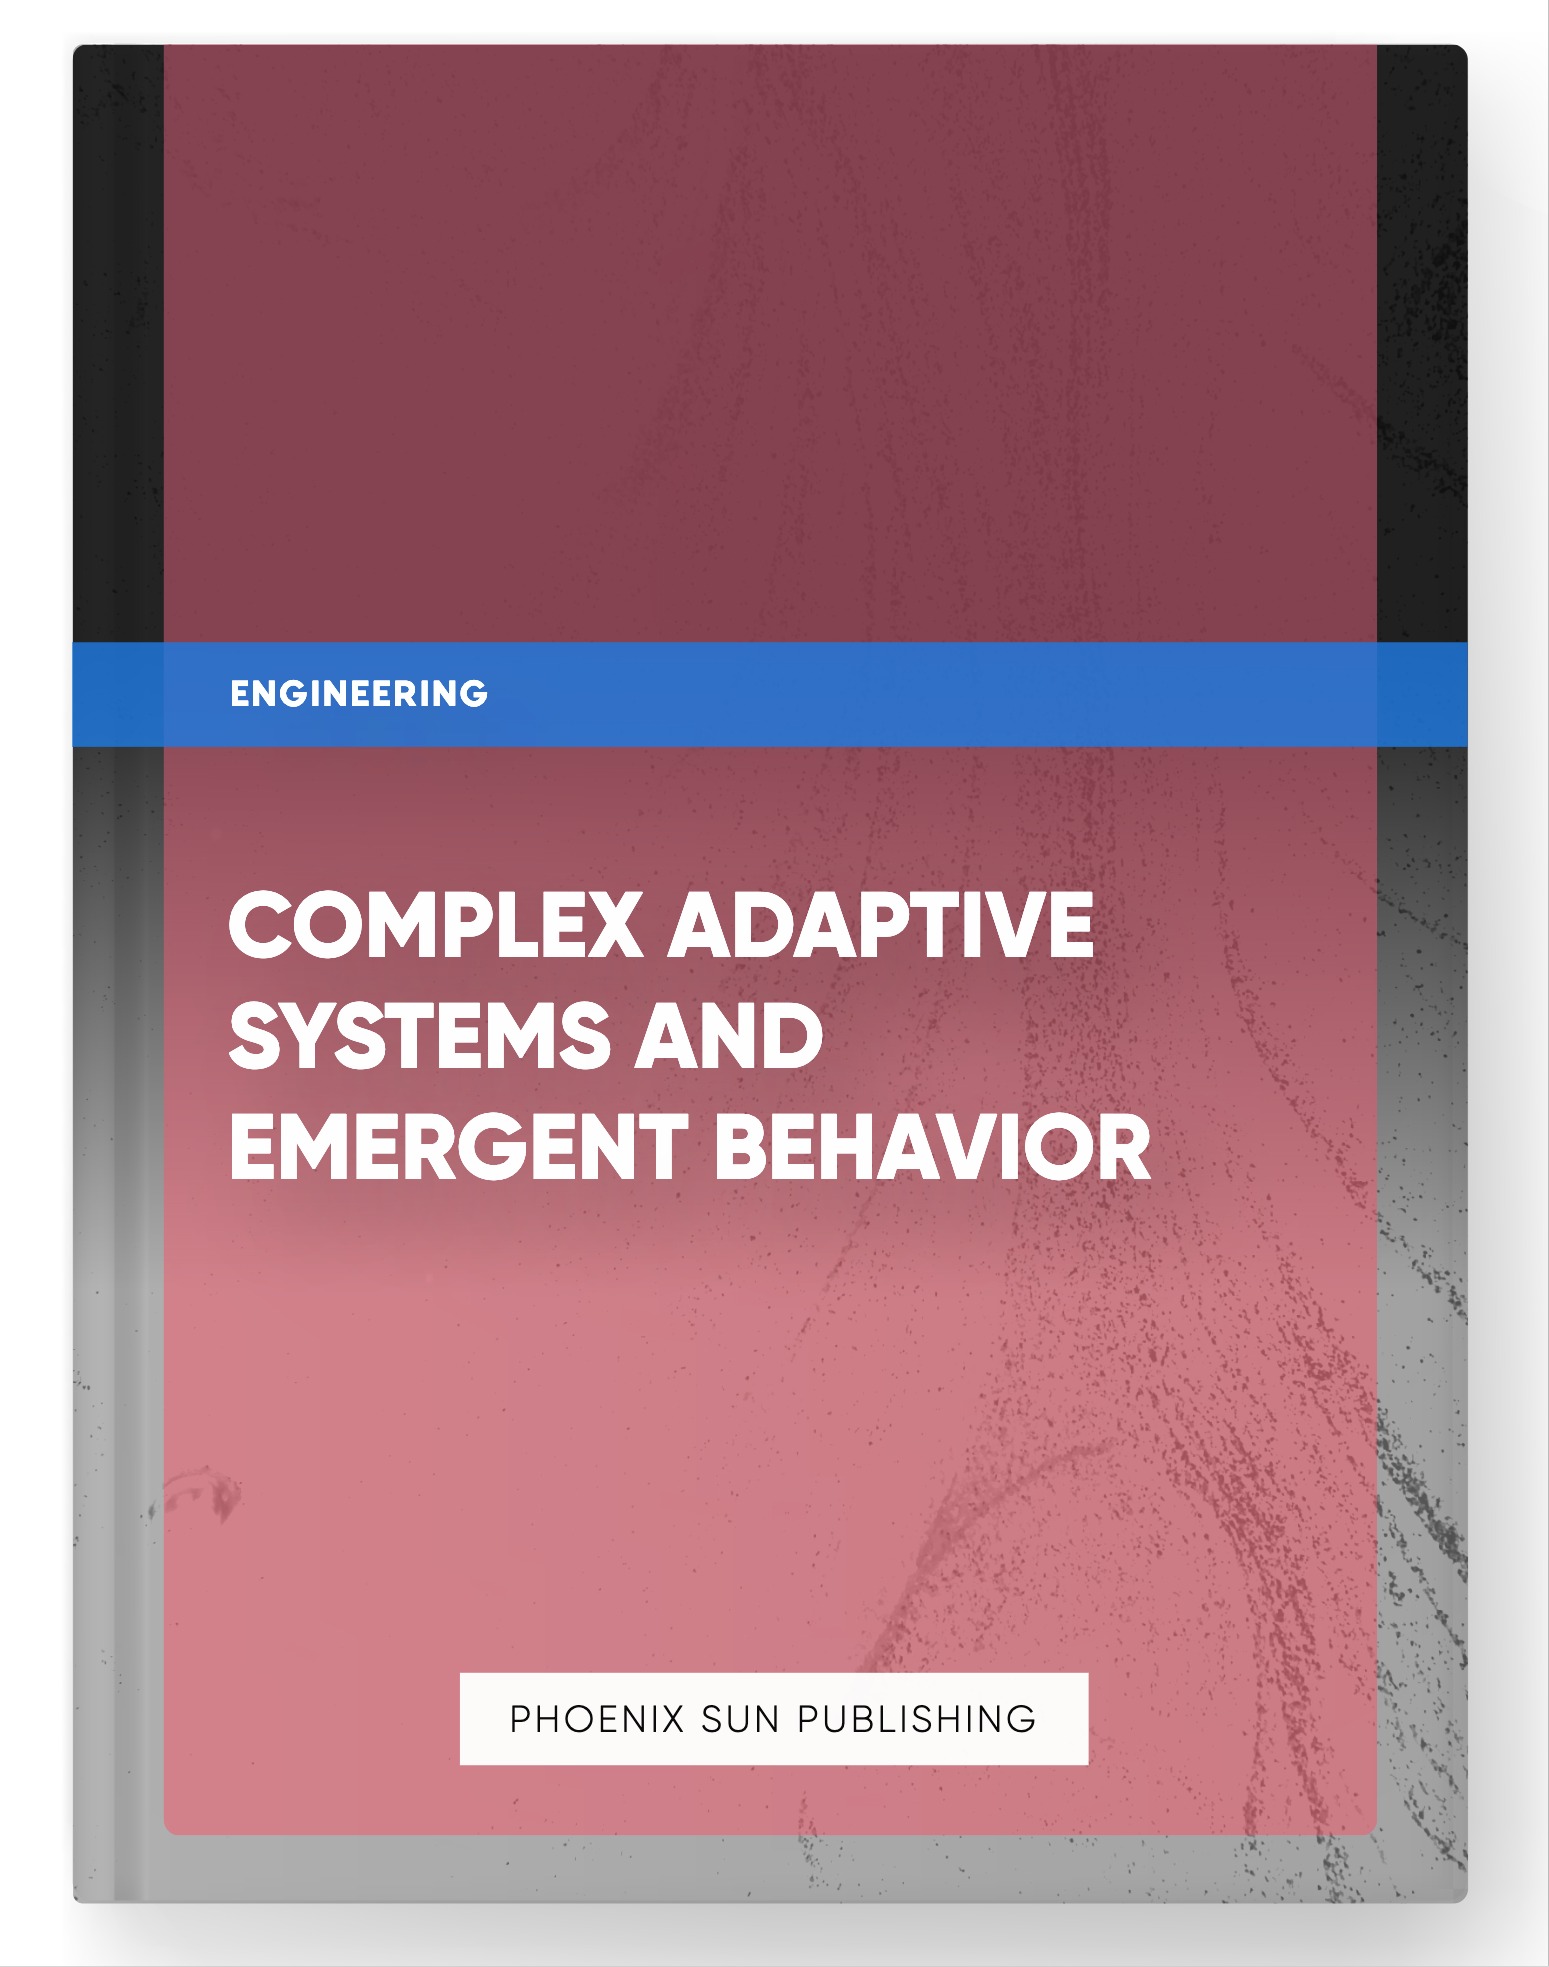 Complex Adaptive Systems and Emergent Behavior